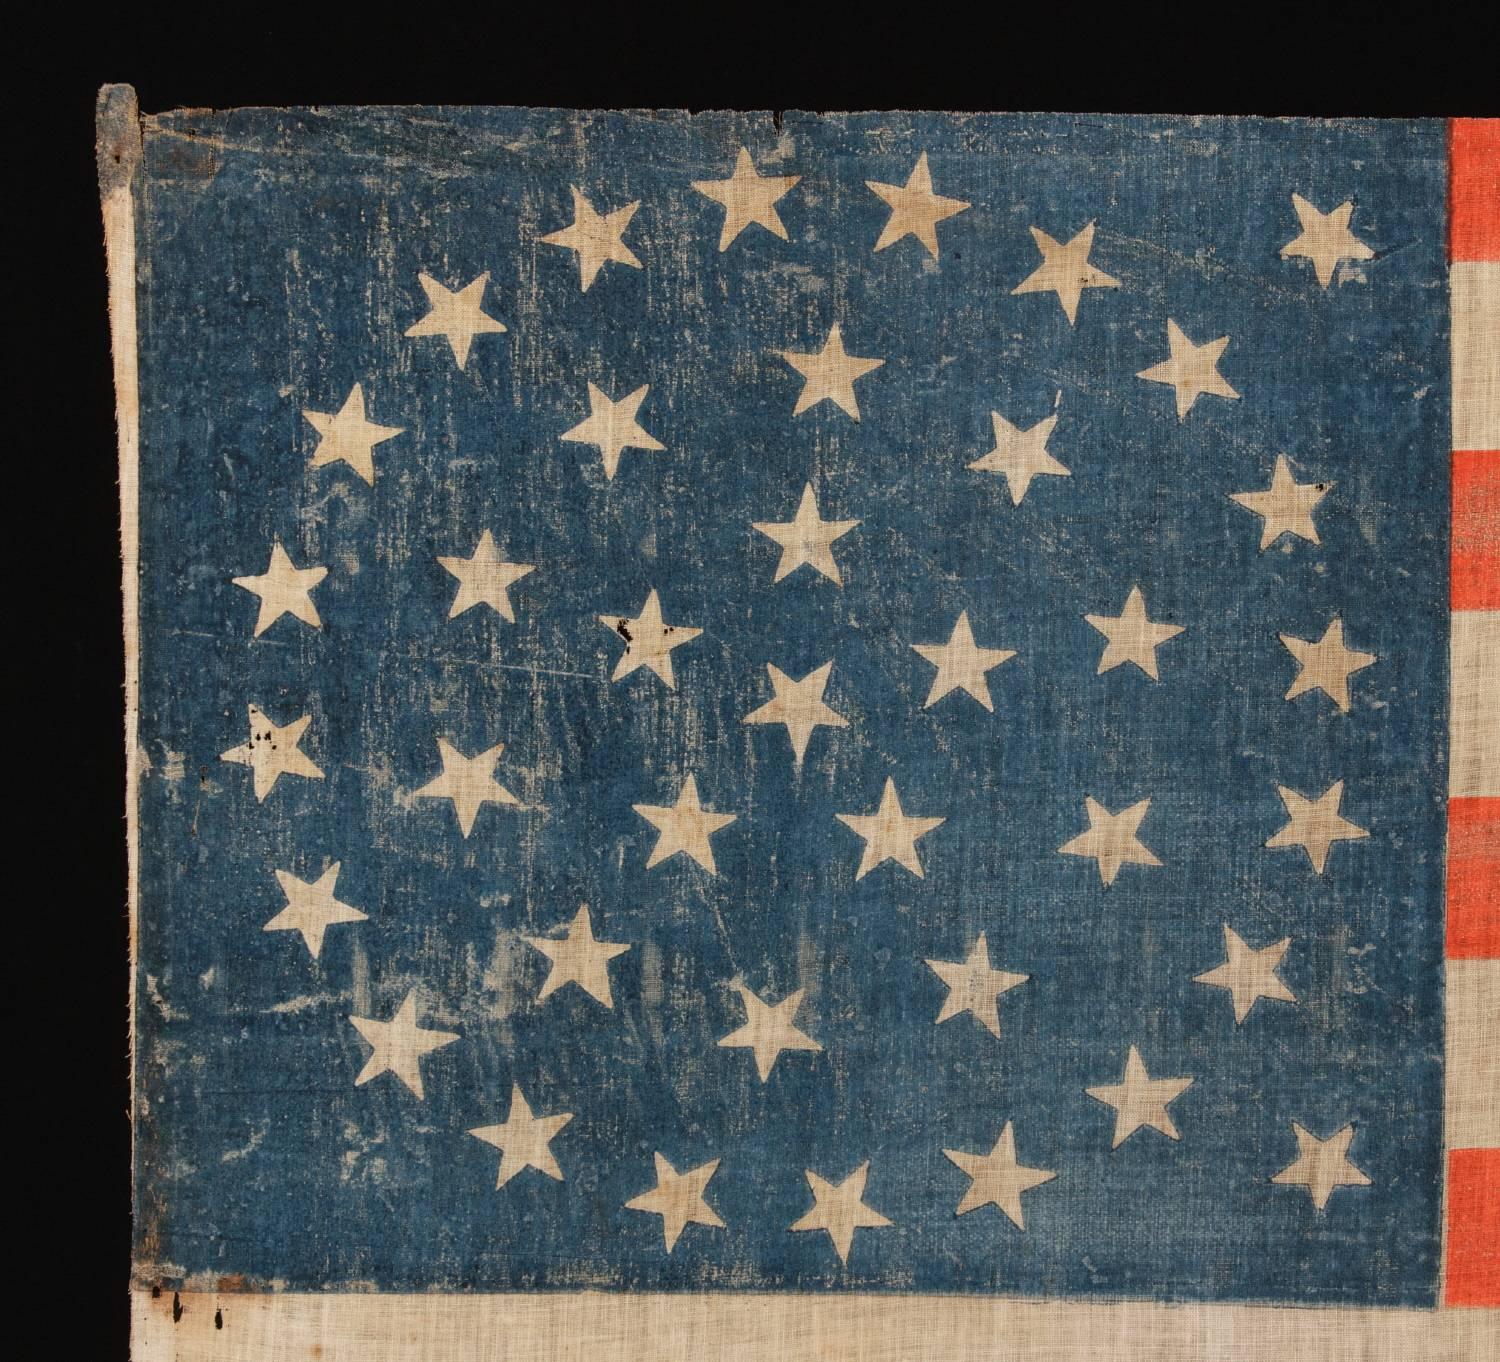 American 38 Star, Colorado Statehood Flag, with Stars in a Medallion Configuration